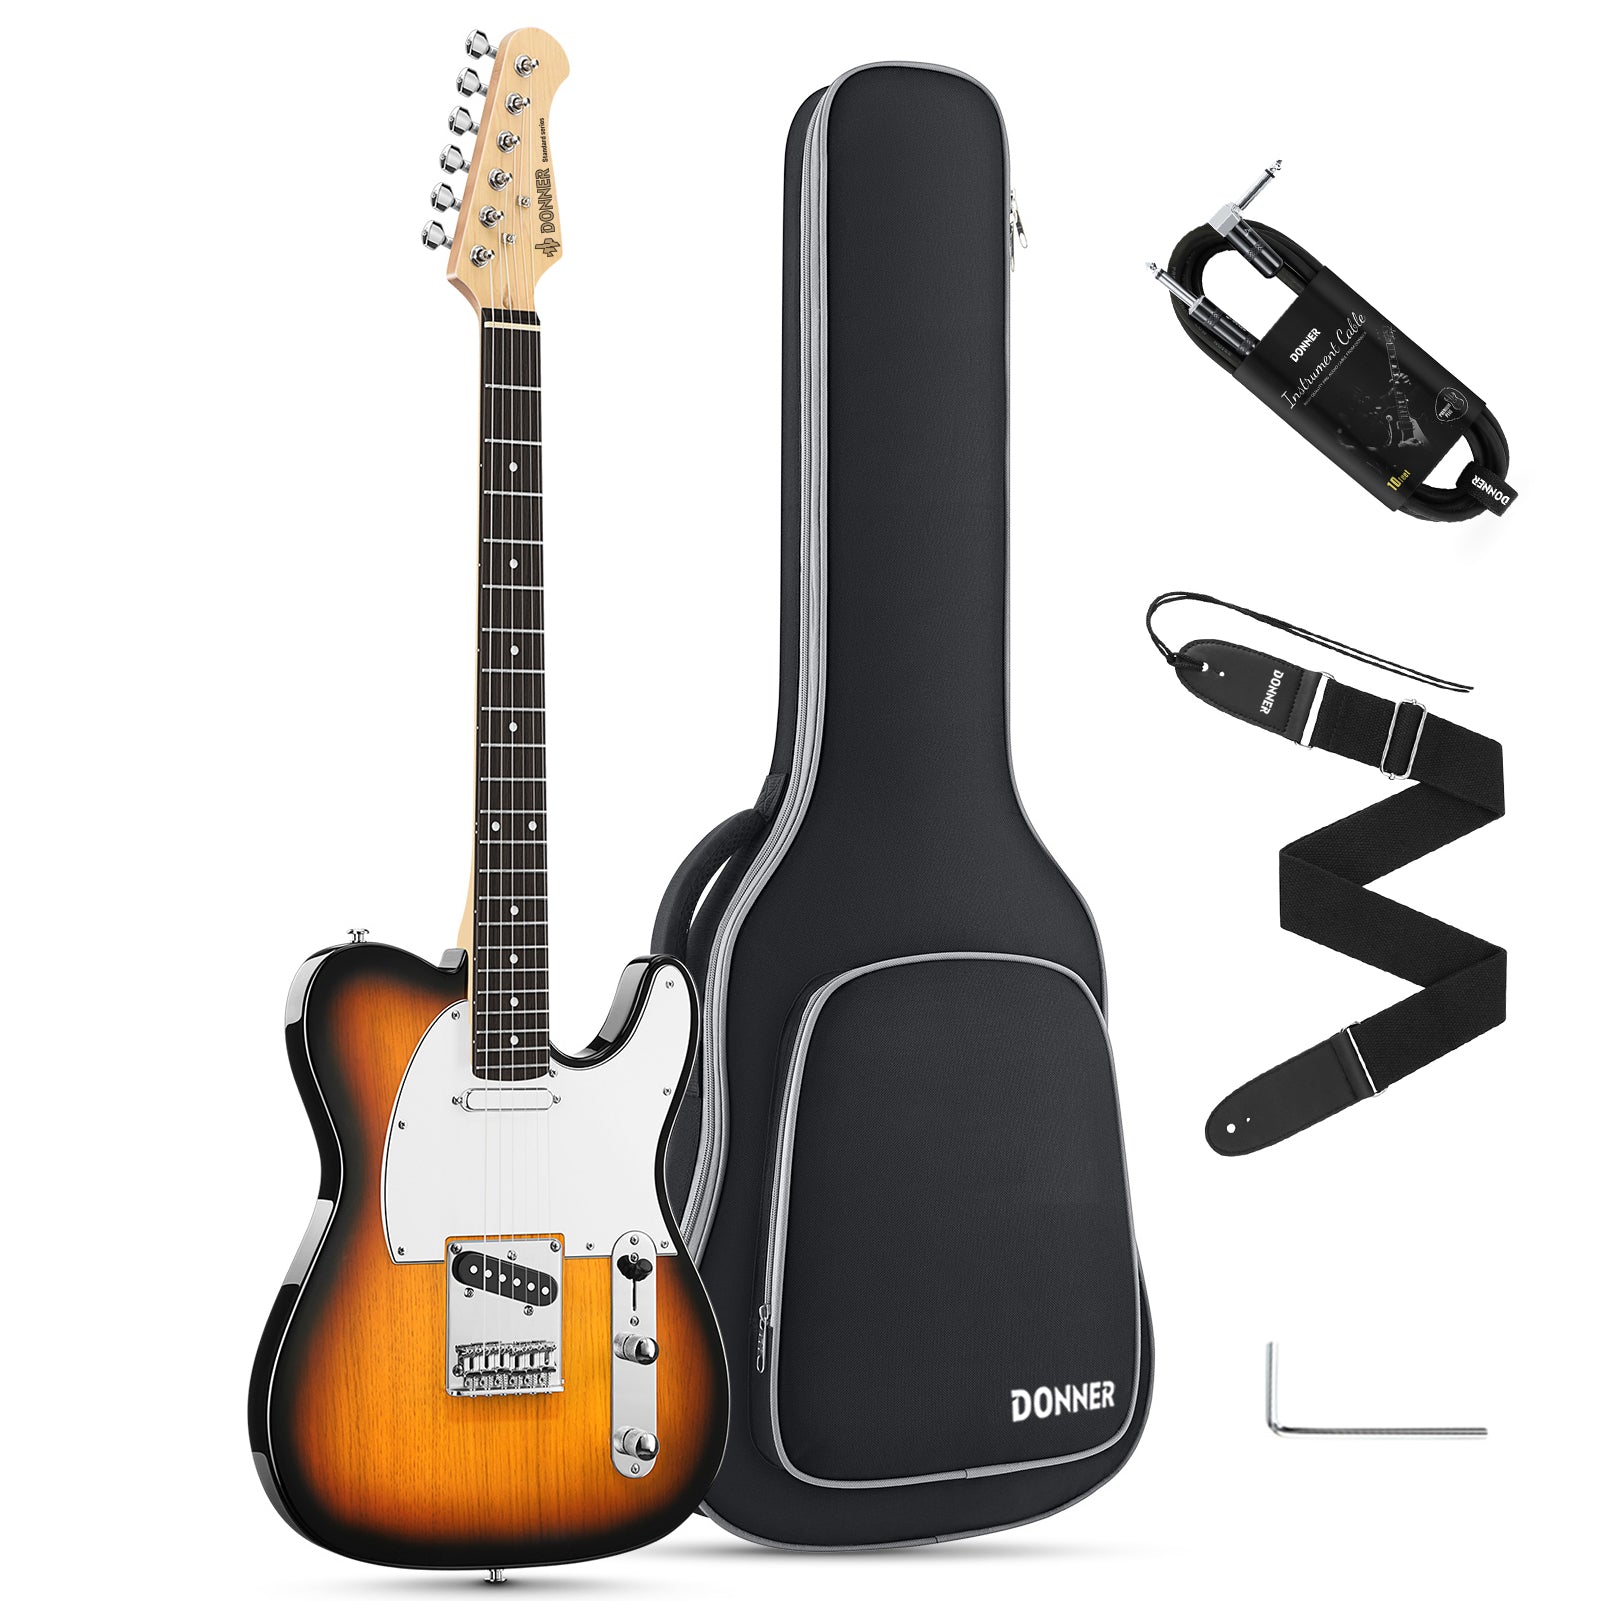 

Donner DTC-100 Full Size Electric Guitar Kit 39-inch Solid Body S-S Pickup for Beginner